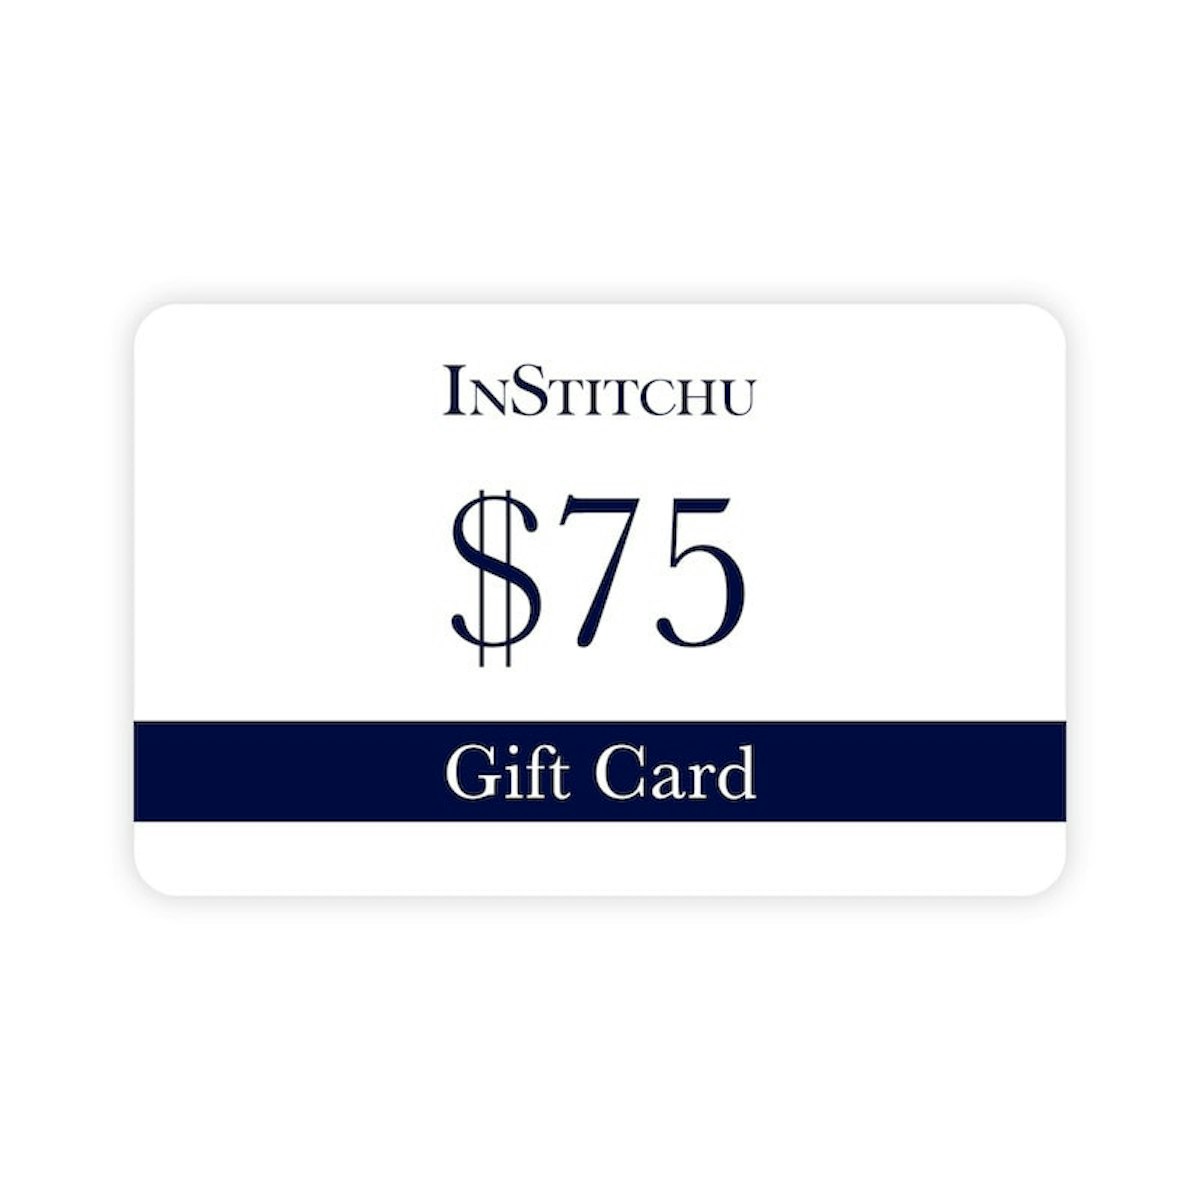 InStitchu Physical Gift Card $75